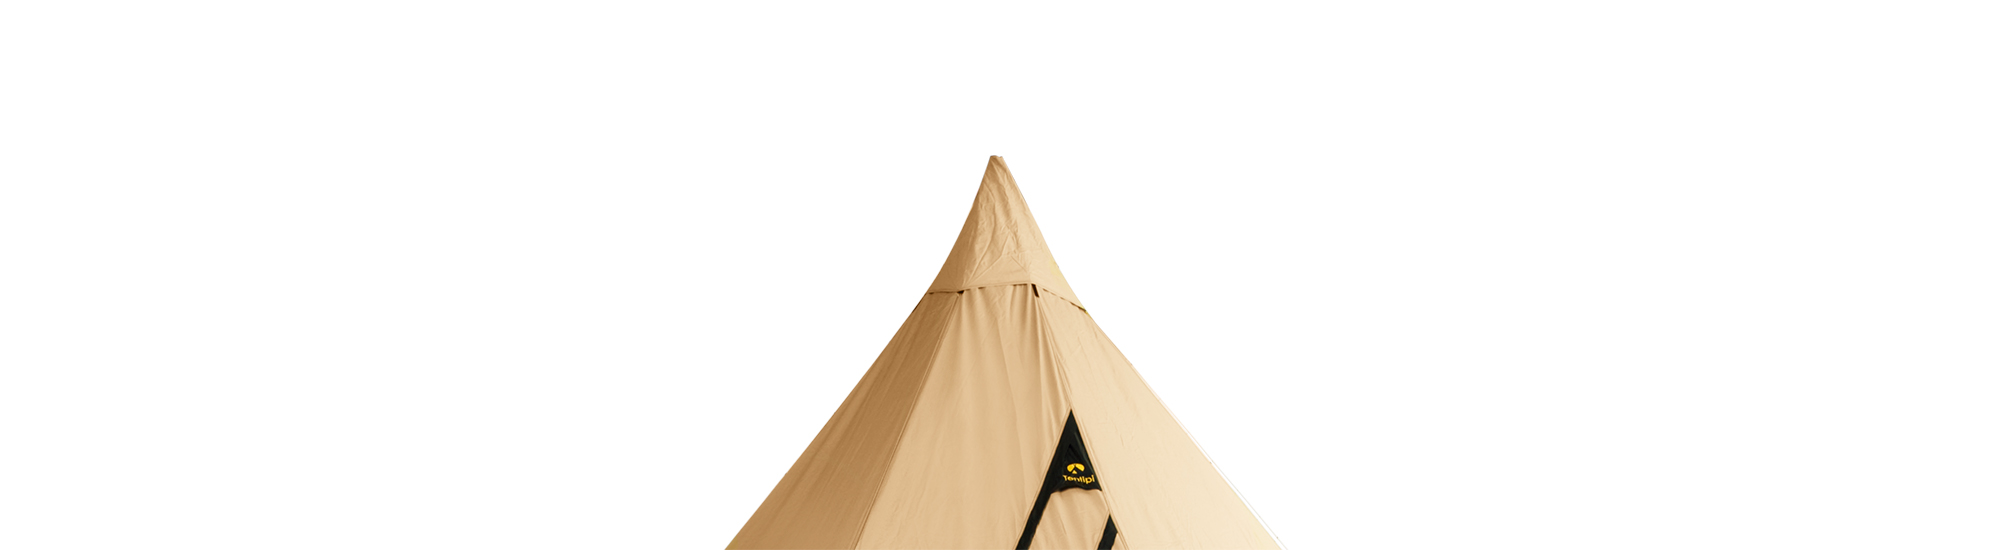 How to use the ventilator cap on a Nordic tipi?